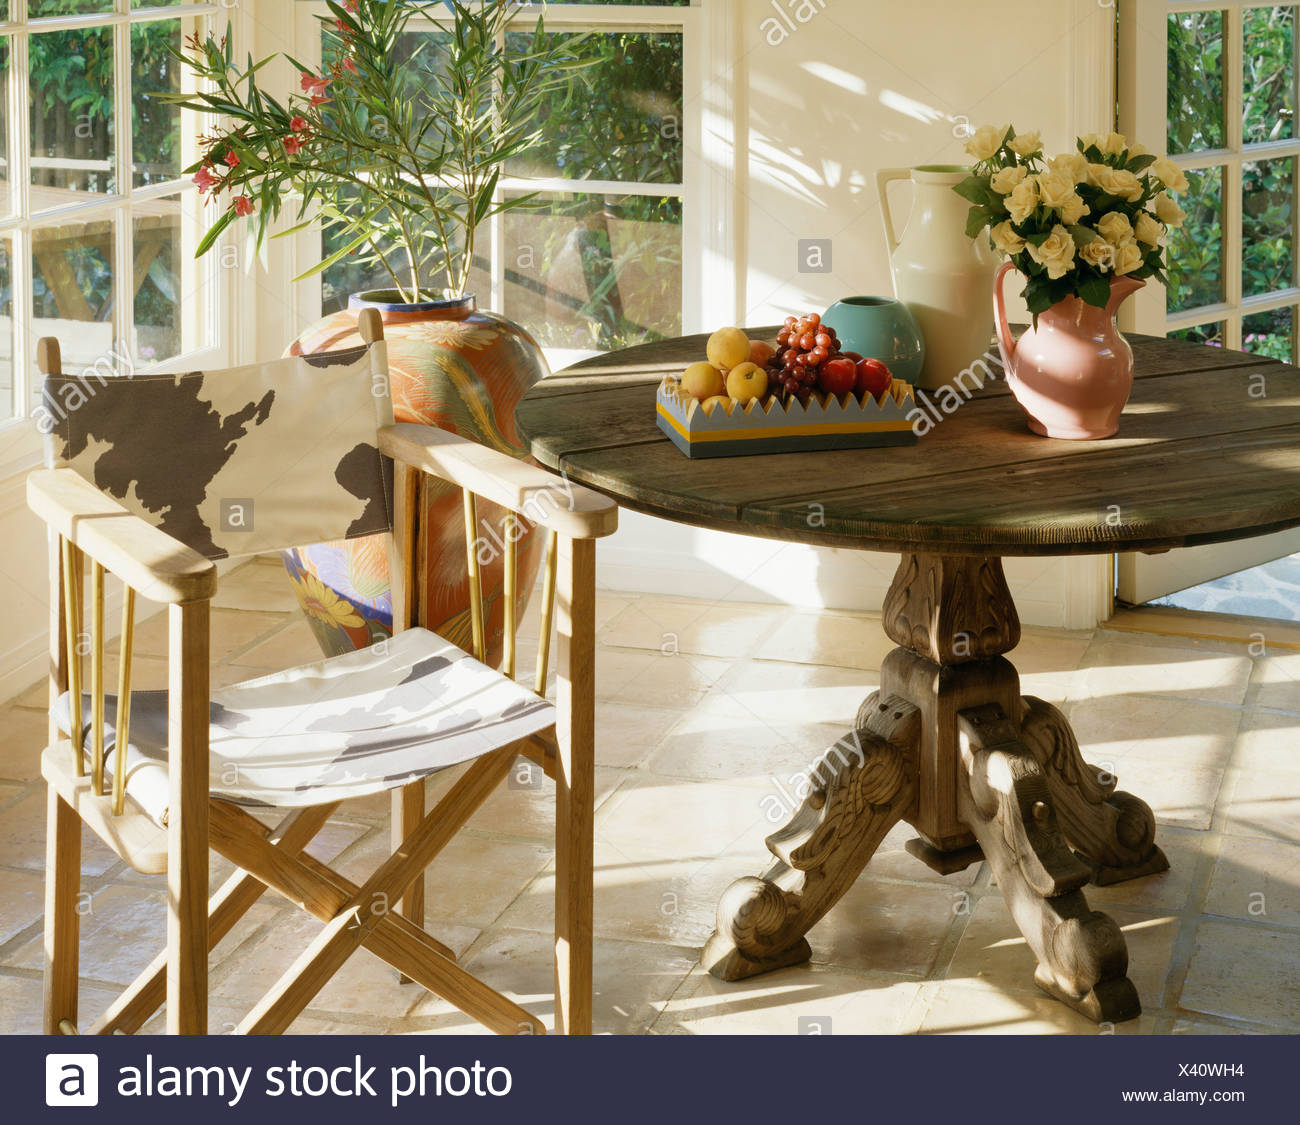 Close Up Of Circular Antique Table With Animal Print Director S Chair In Sunny Dining Room Stock Photo Alamy